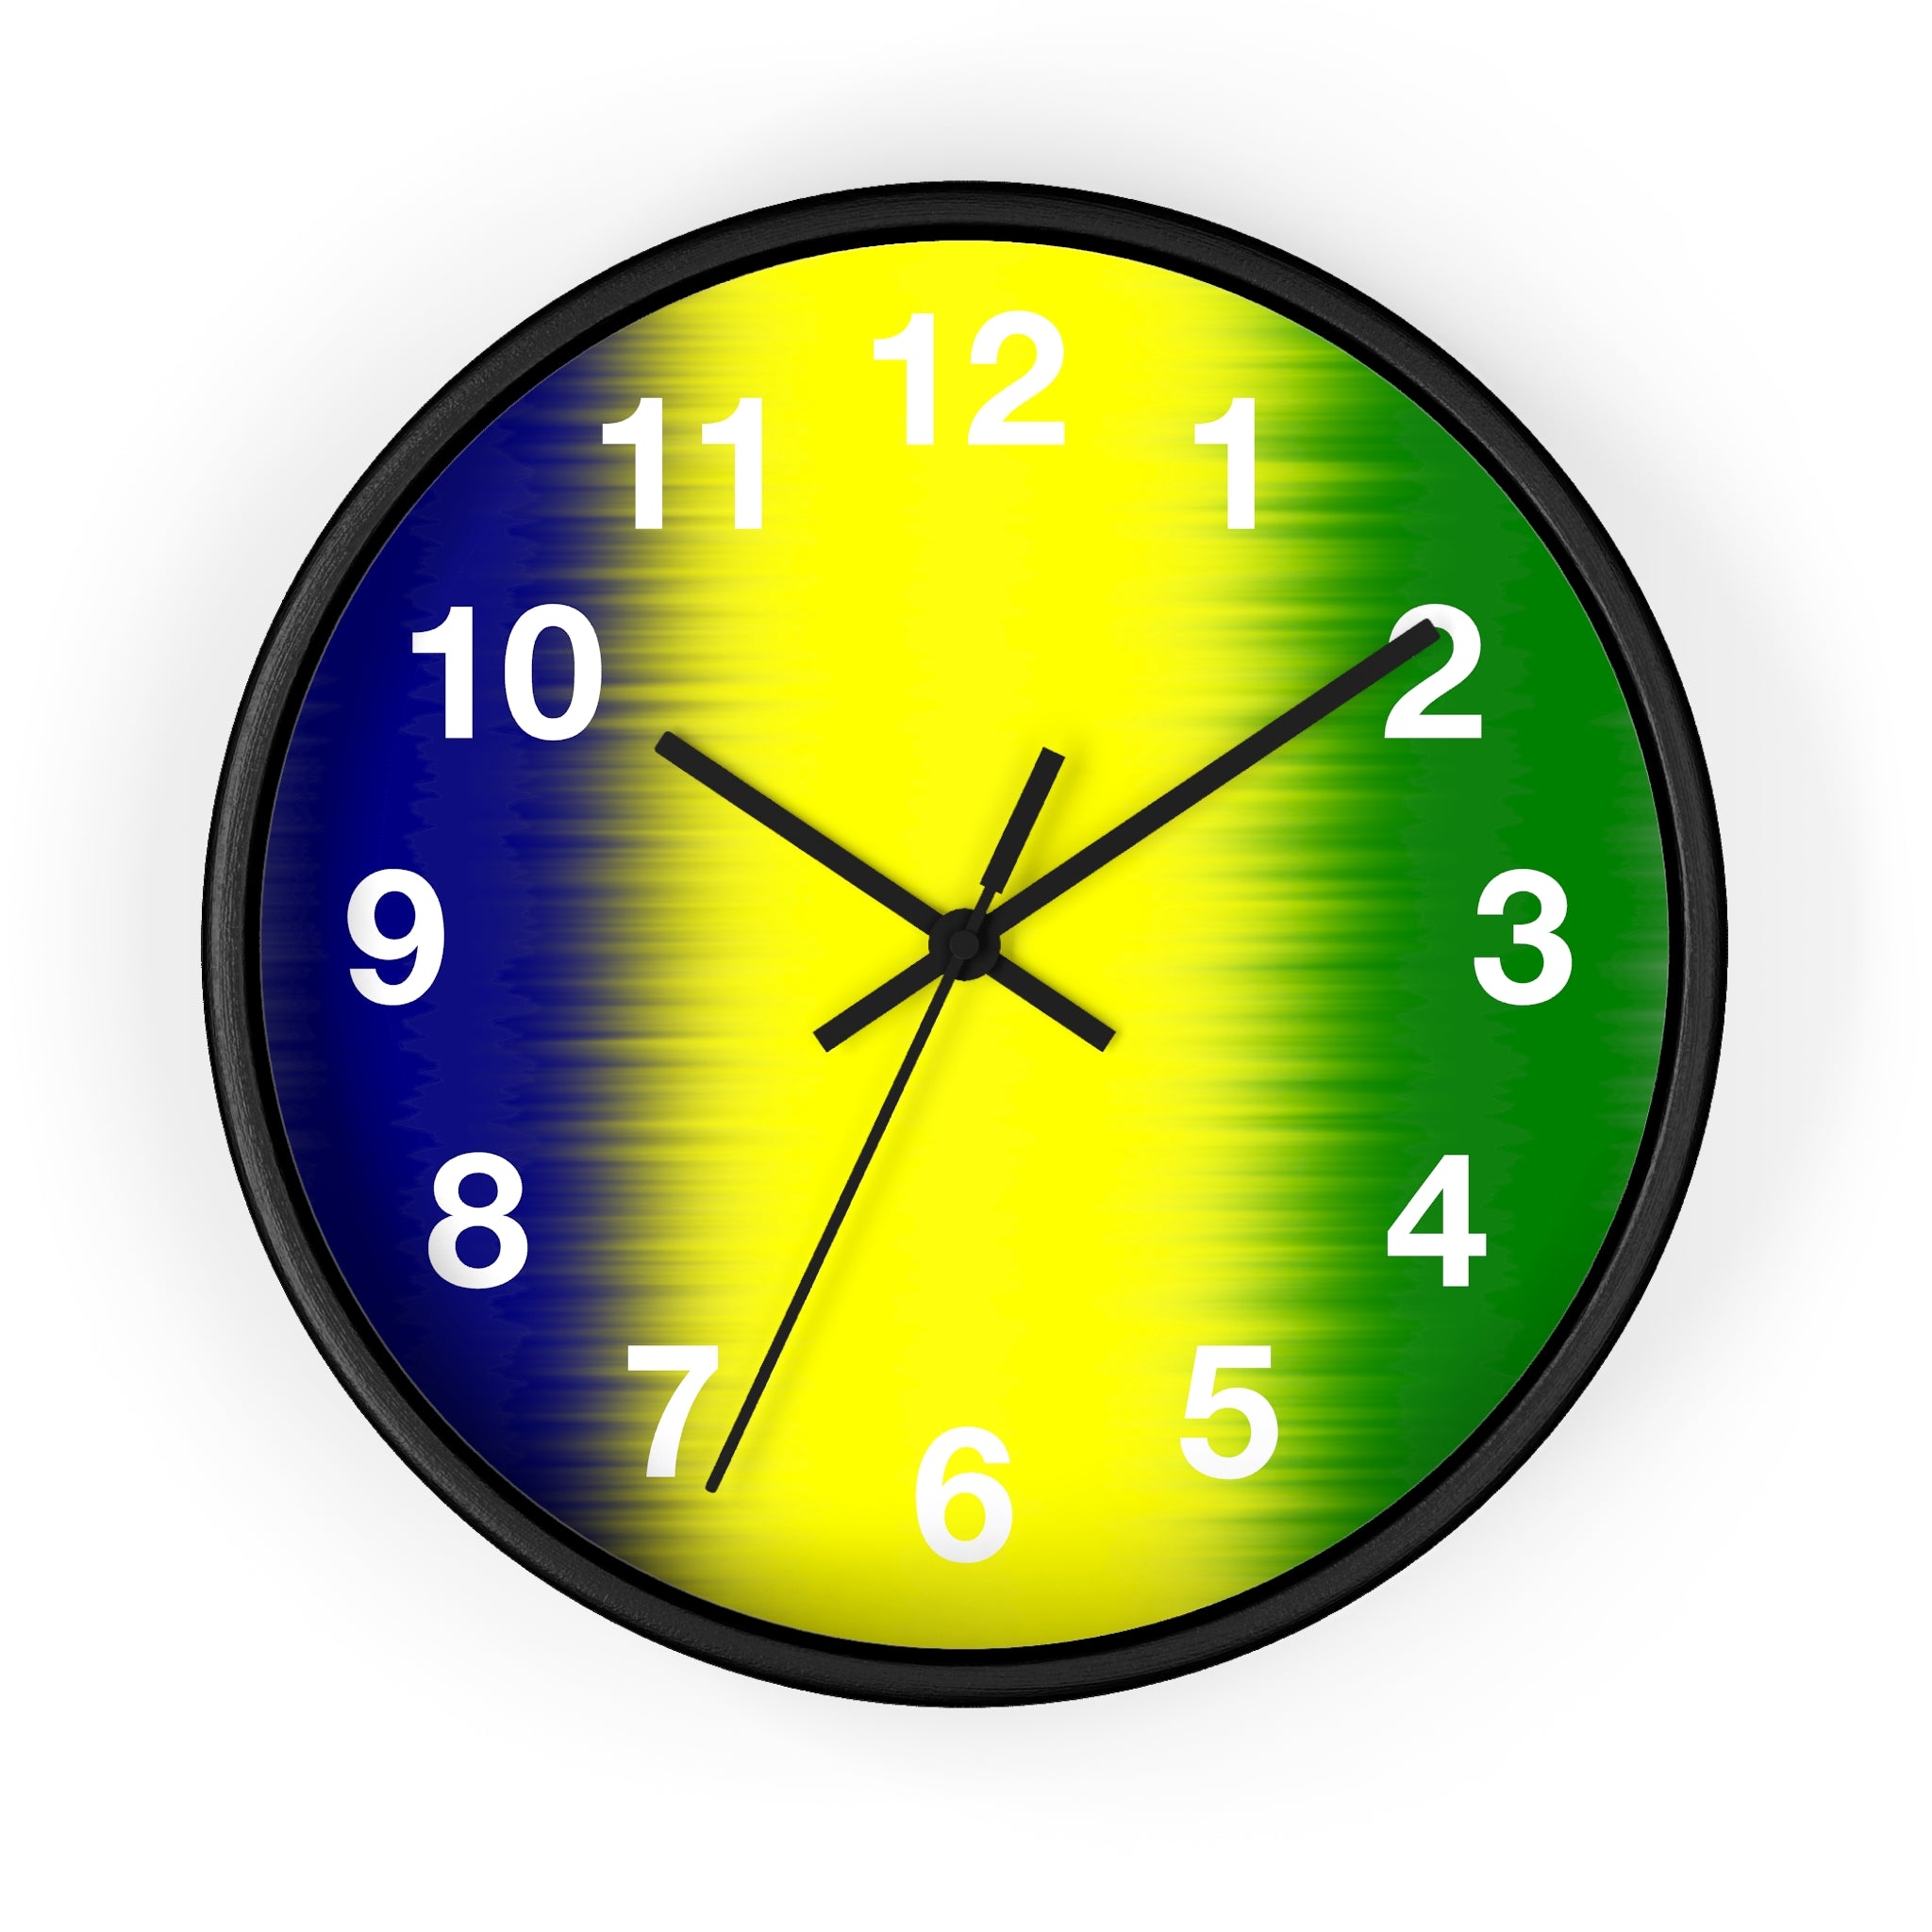 10 inch round wall clock with St. Vincent and the Grenadines national colors.